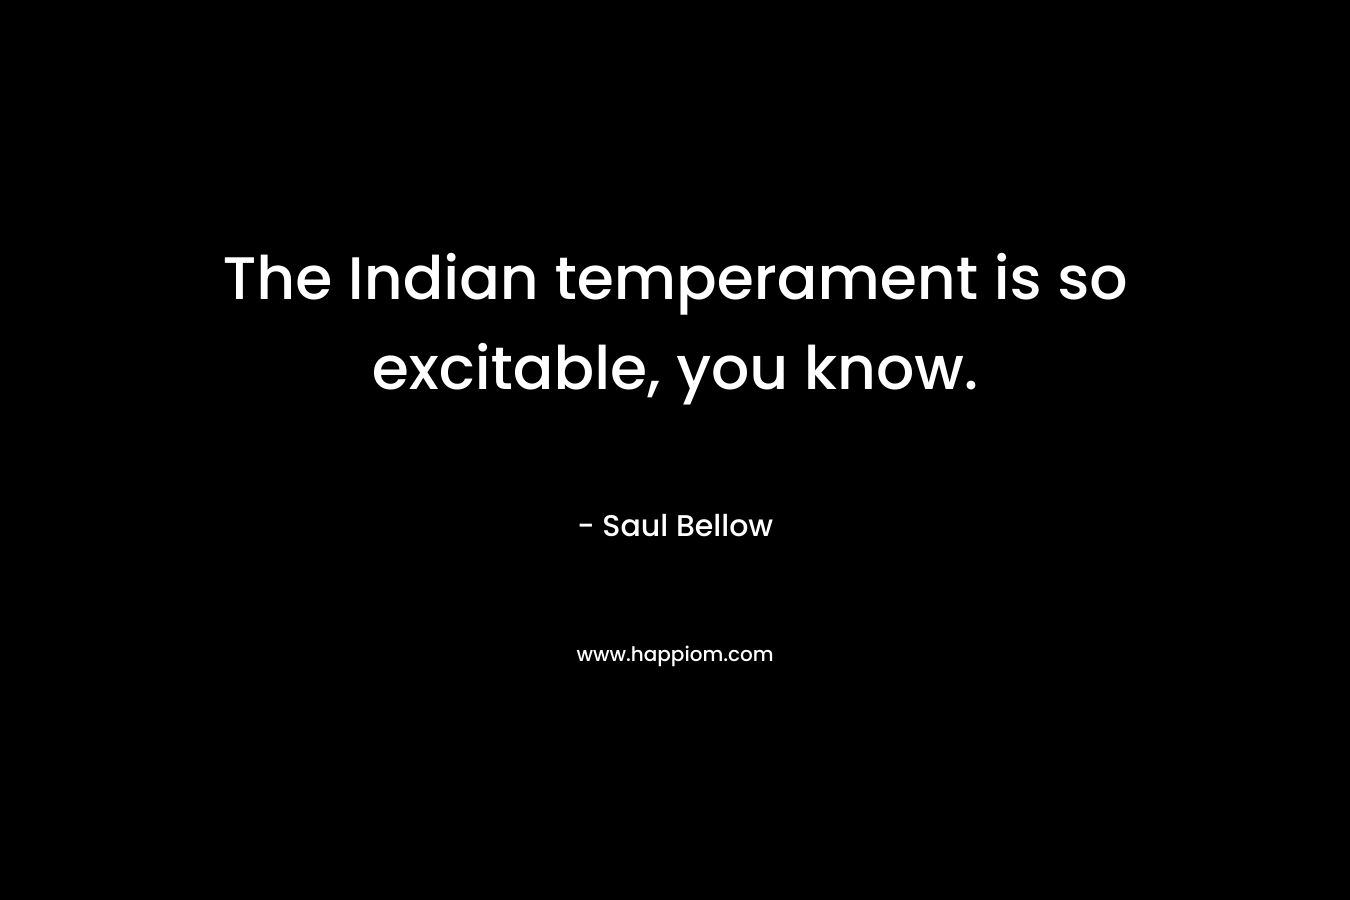 The Indian temperament is so excitable, you know.